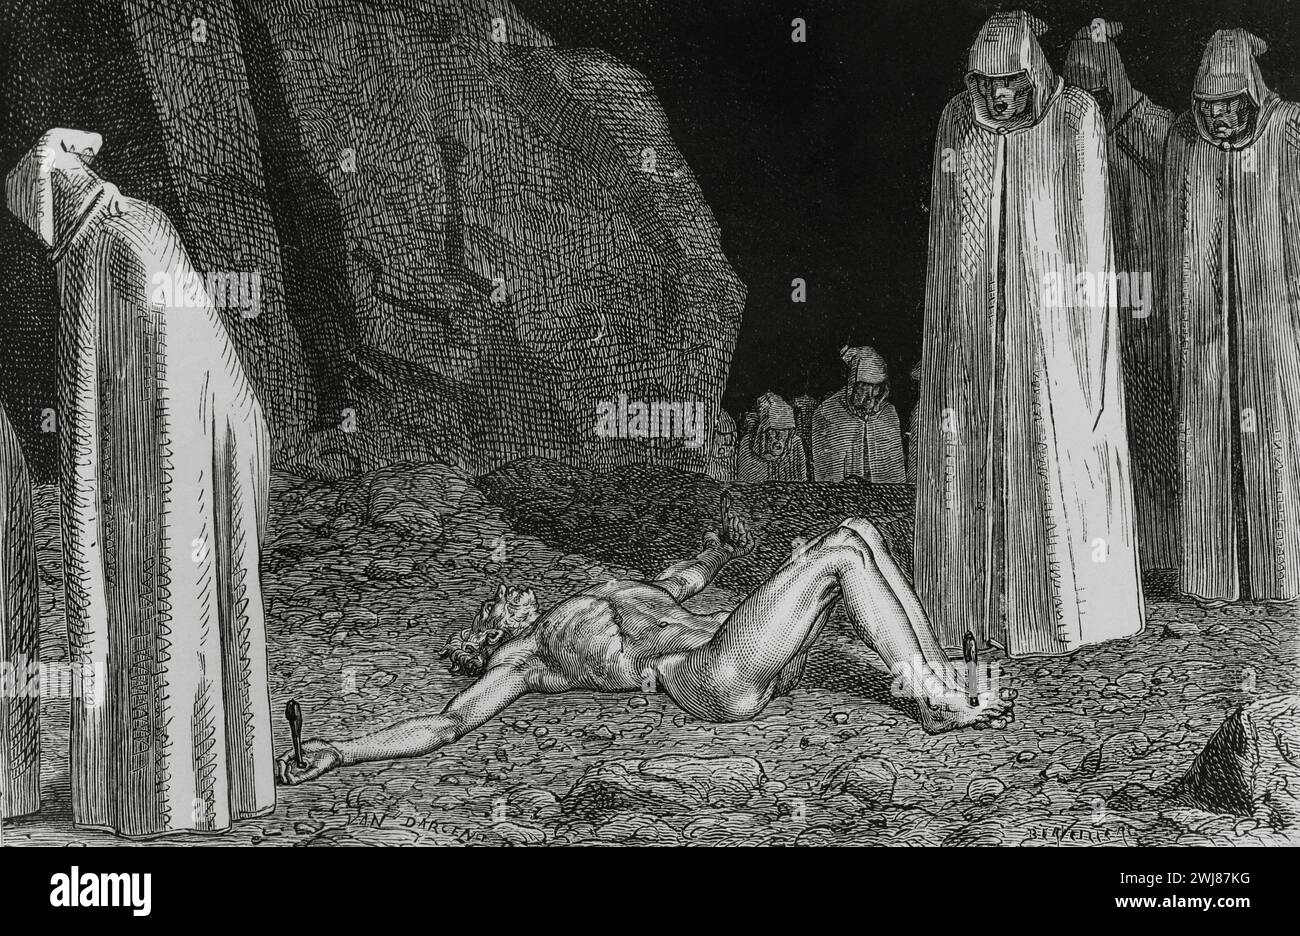 The Divine Comedy (1307-1321). Italian narrative poem by the Italian poet Dante Alighieri (1265-1321). Inferno (Hell). 'I saw one crucified with three stakes on the ground...' Illustration by Yann Dargent (1824-1899). Engraving by Berveiller. Published in Paris, 1888. Stock Photo